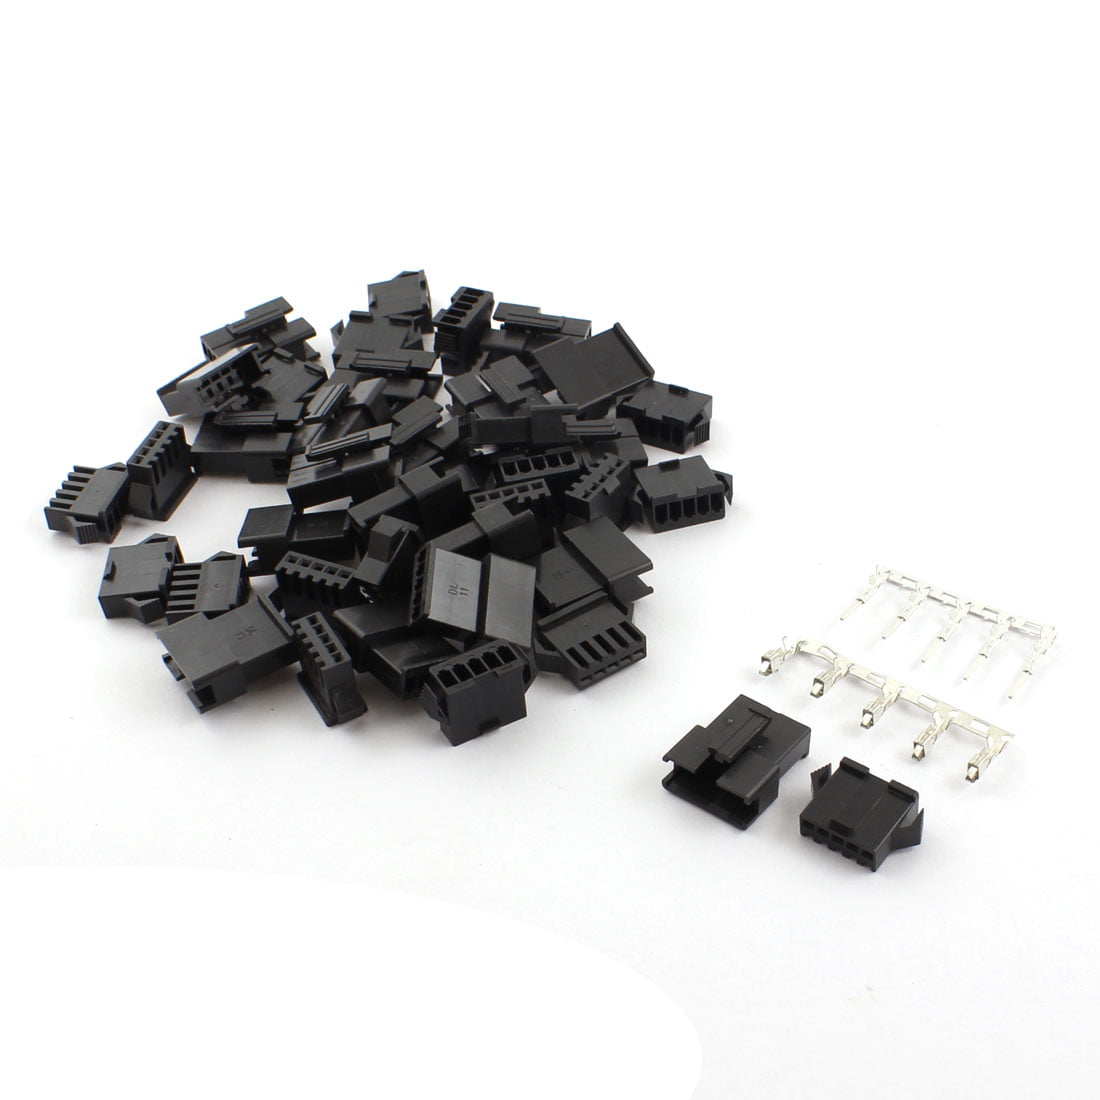 500 Pieces 2.5mm Pitch JST 2.5mm Pitch Male and Female Pin Header SM JST Connector Kit 4 Pin Housing JST Adapter Cable Connector Socket Male and Female JST SM Crimp DIP Kit.